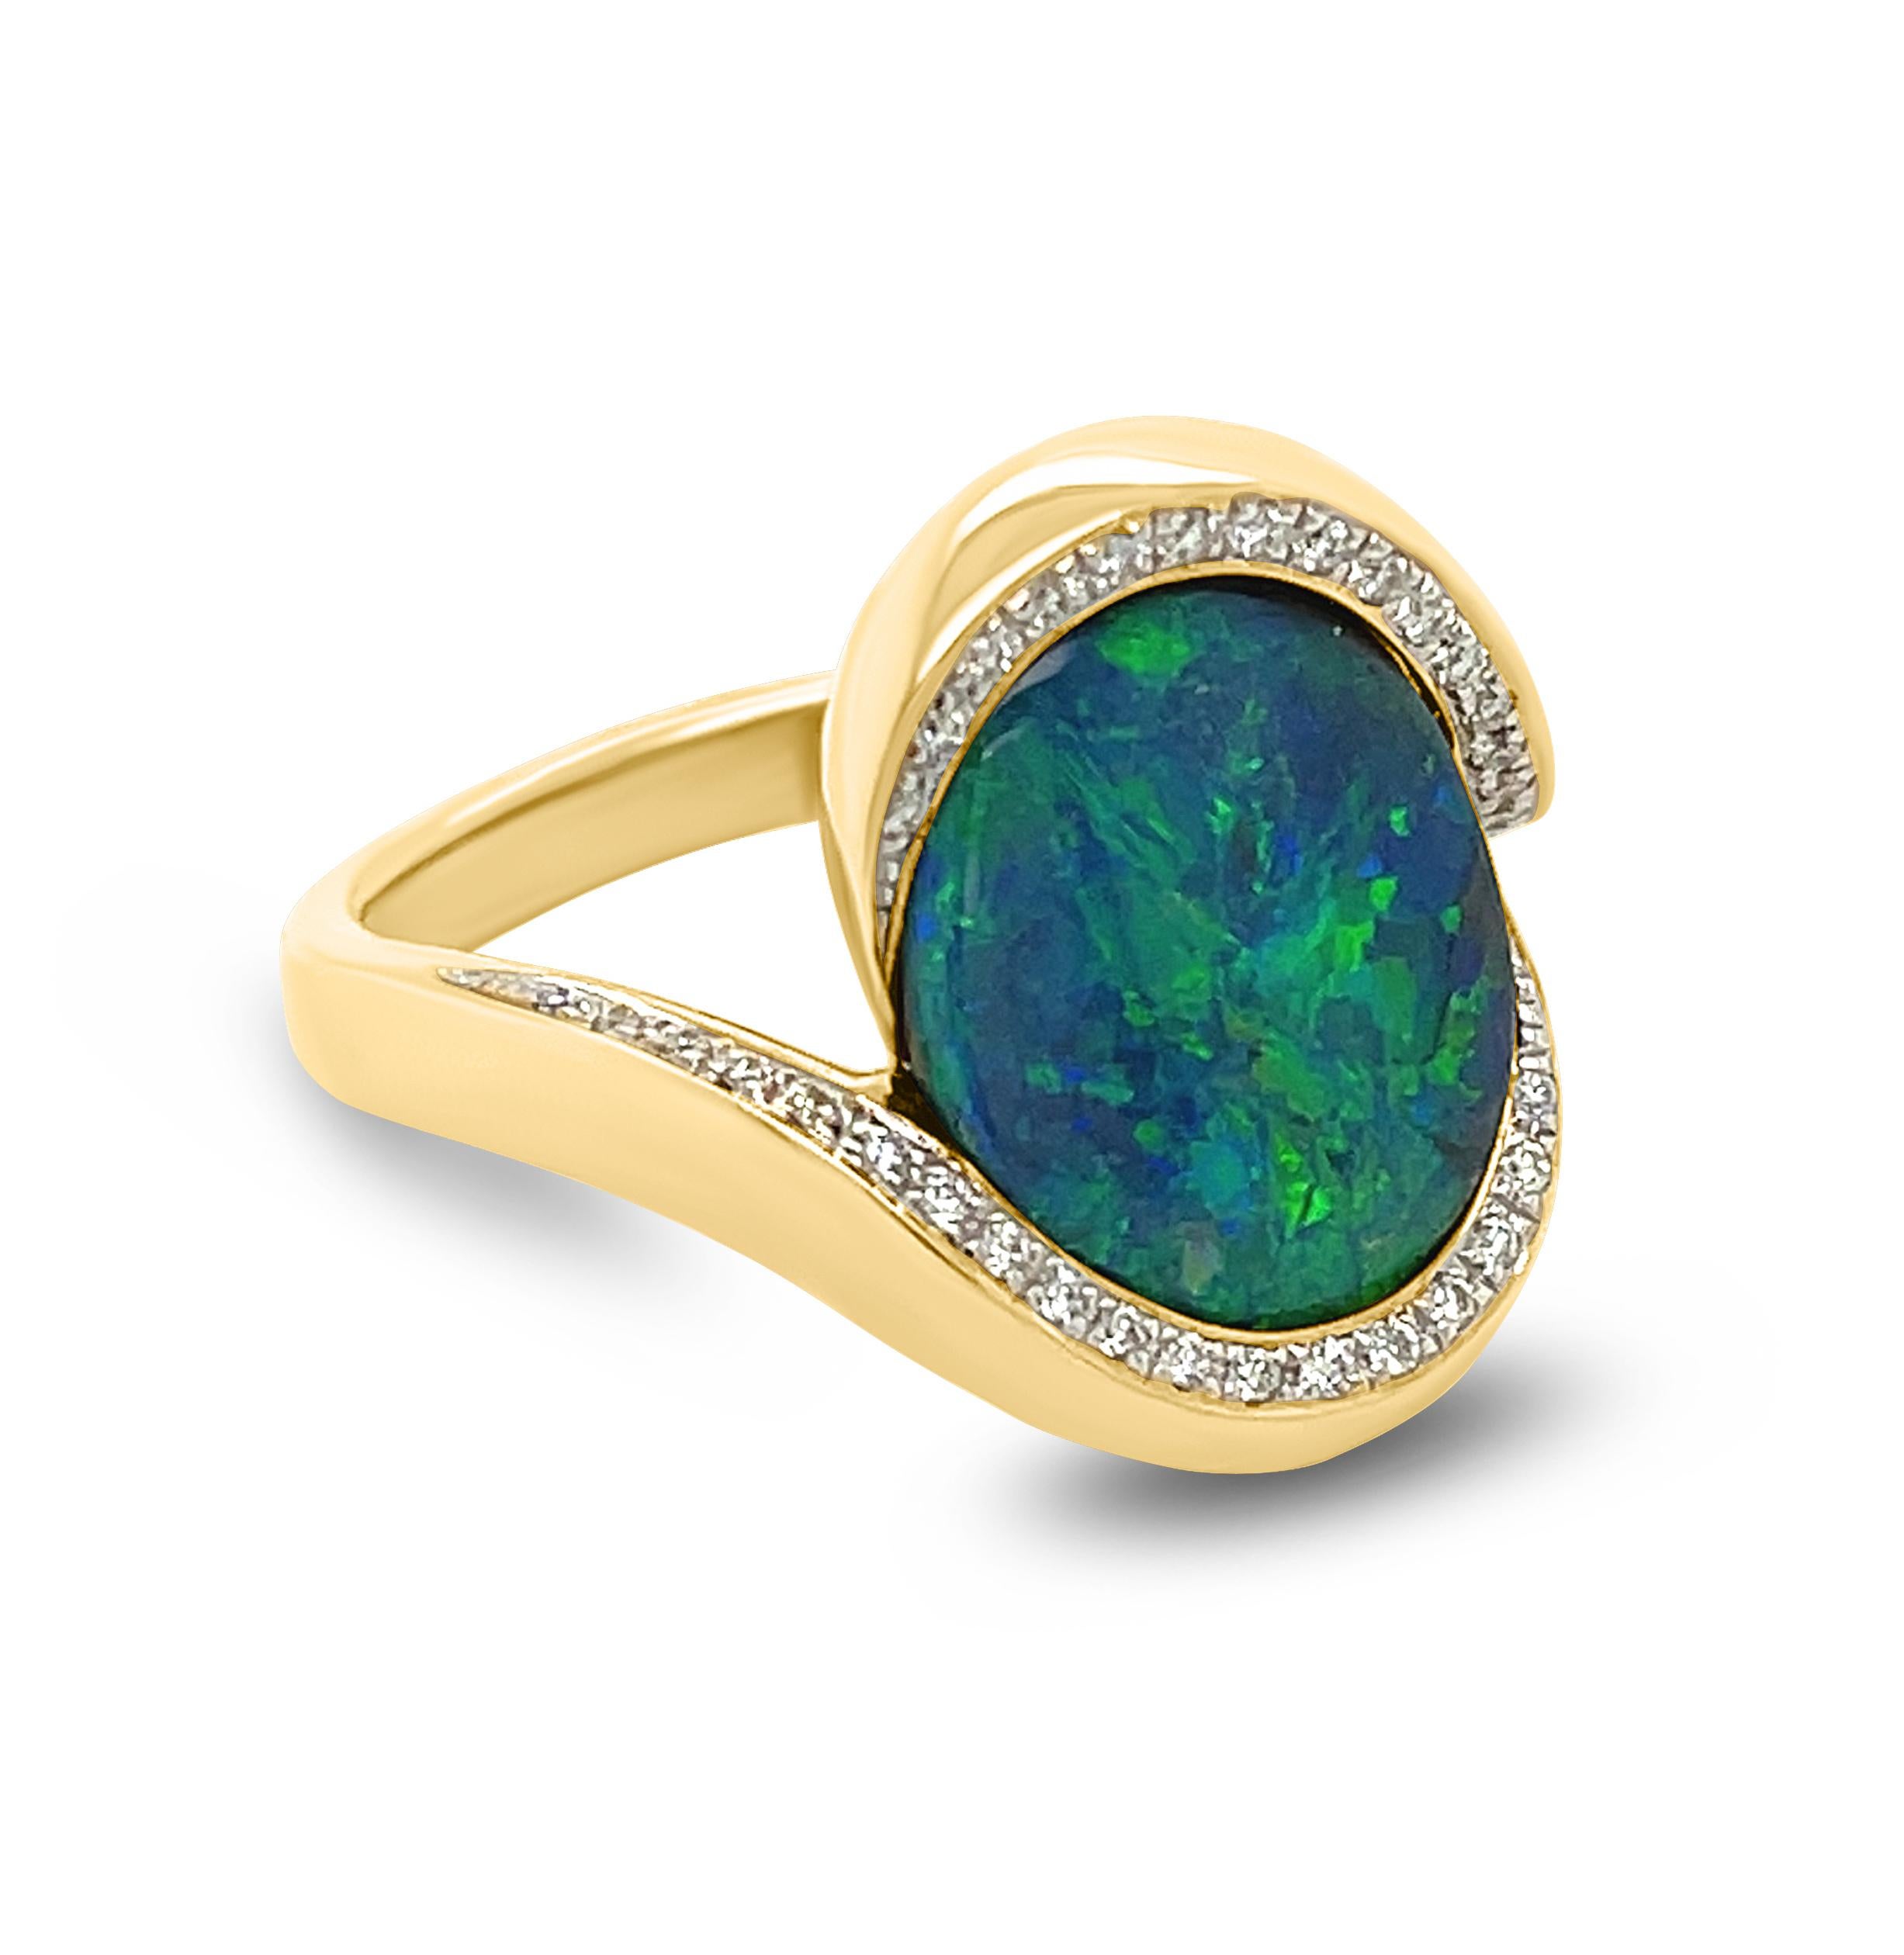 The ‘Gabriella’ opal engagement ring features a gracefully elegant and unique black opal (3.35ct) sourced from Lightning Ridge opal mines in NSW, Australia. The rare play-of-colour in this black opal is absolutely magnificent. Masterfully crafted in